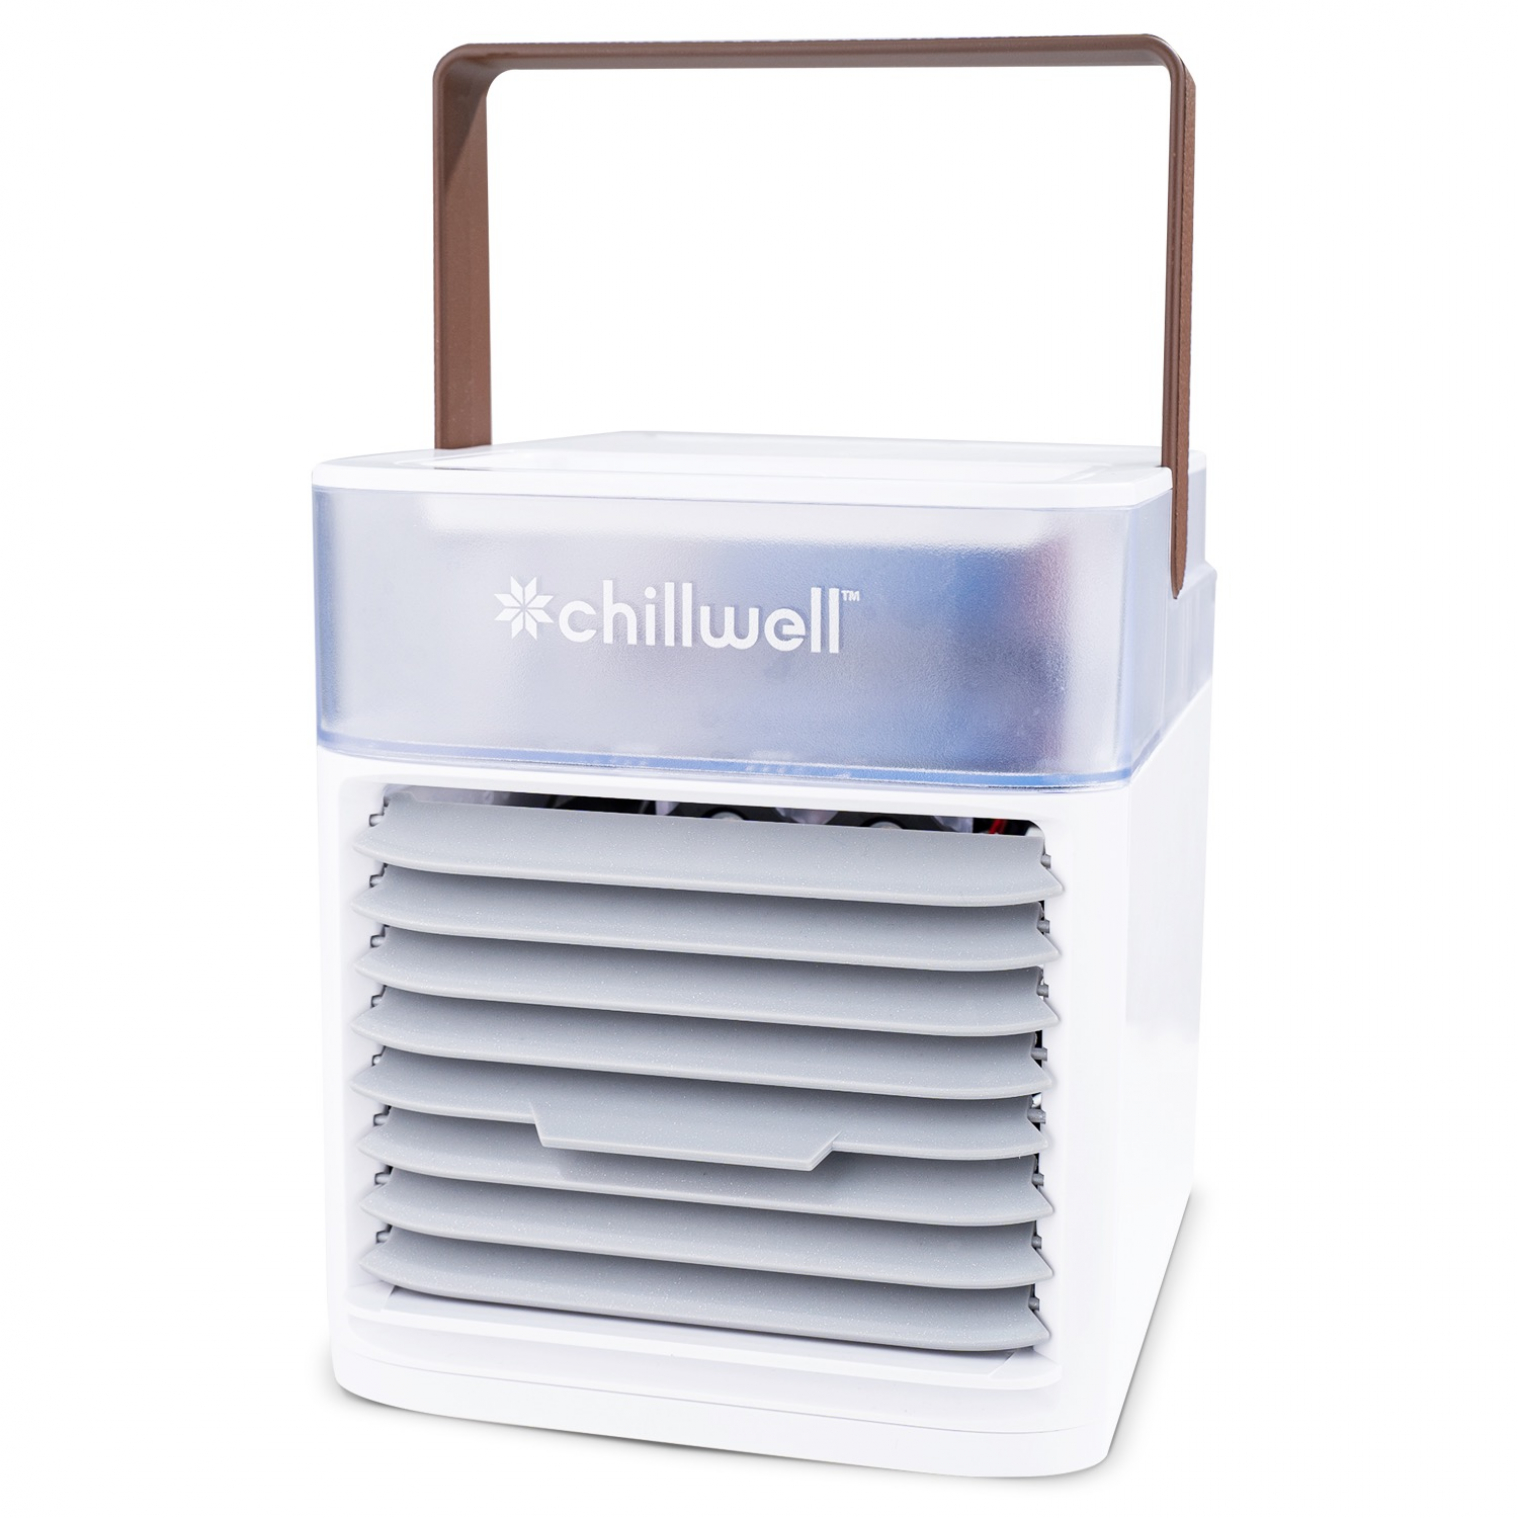 Chillwell Ac Portable